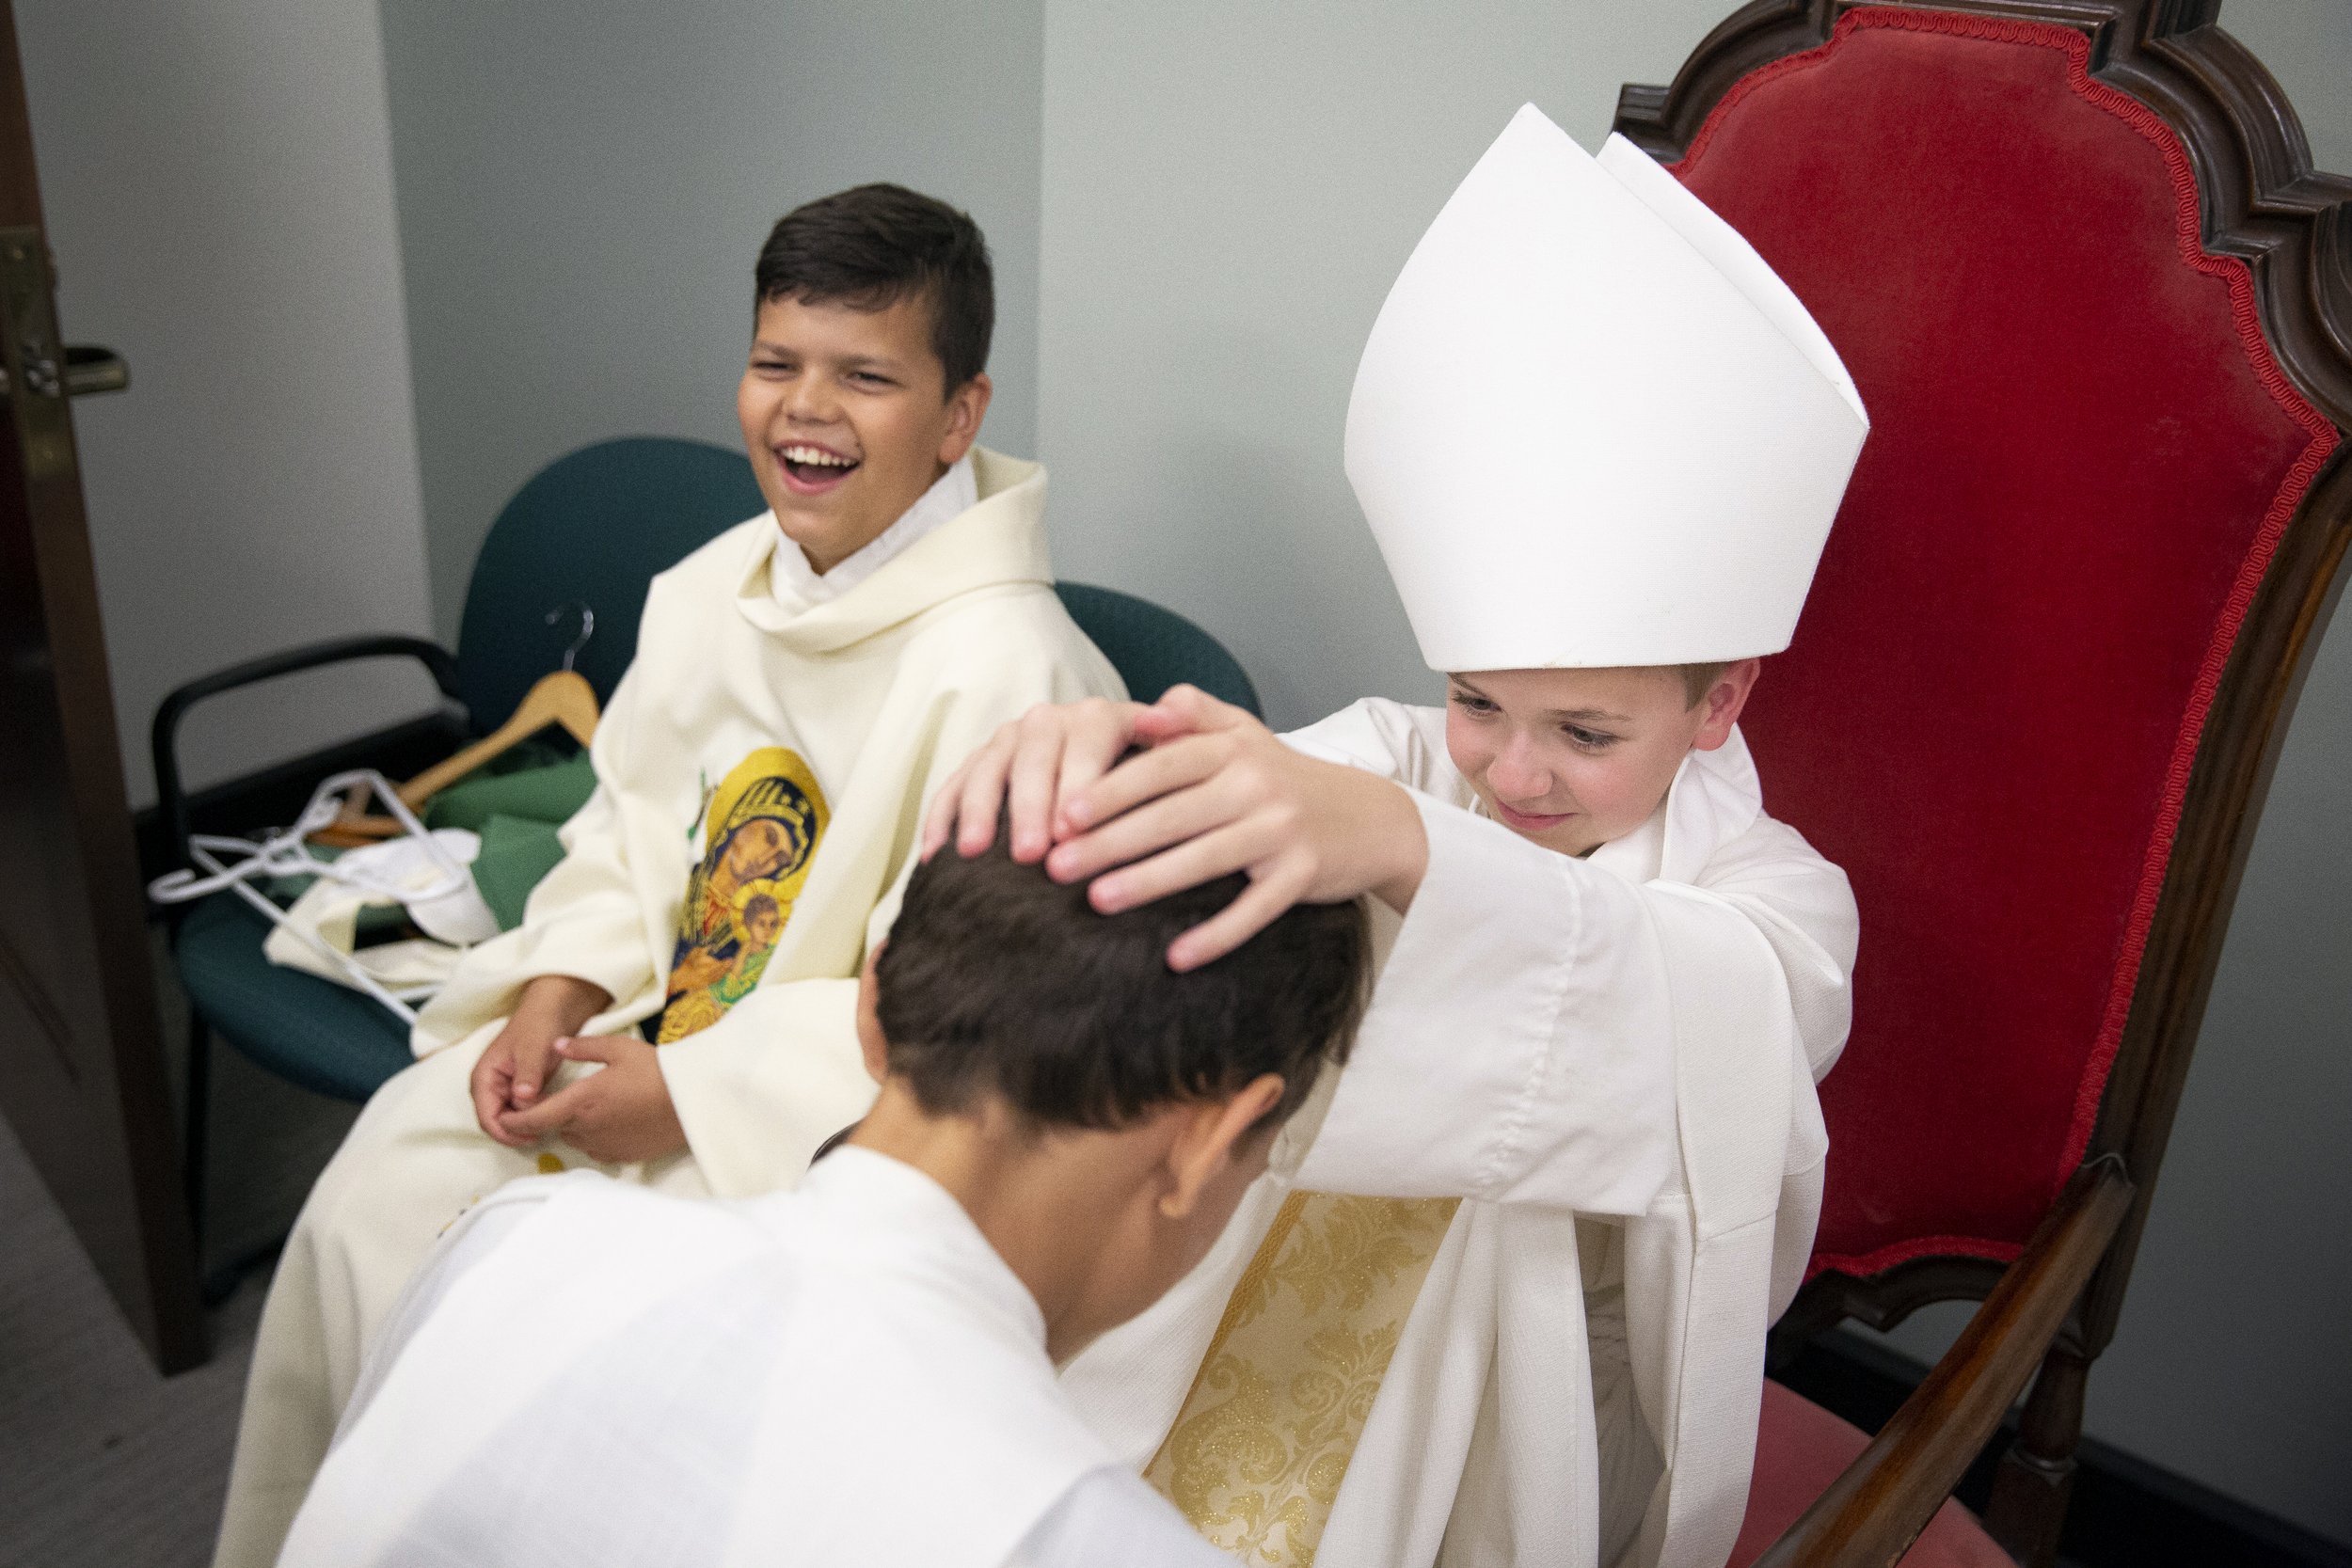  While learning about priest ordinations, Michael Lenzenhuber played role of bishop during the laying on of hands with John Paul Schmidt (head bowed) and Elijah Dwyer (left) during Kenrick-Glennon Days summer camp June 14 at Kenrick-Glennon Seminary 